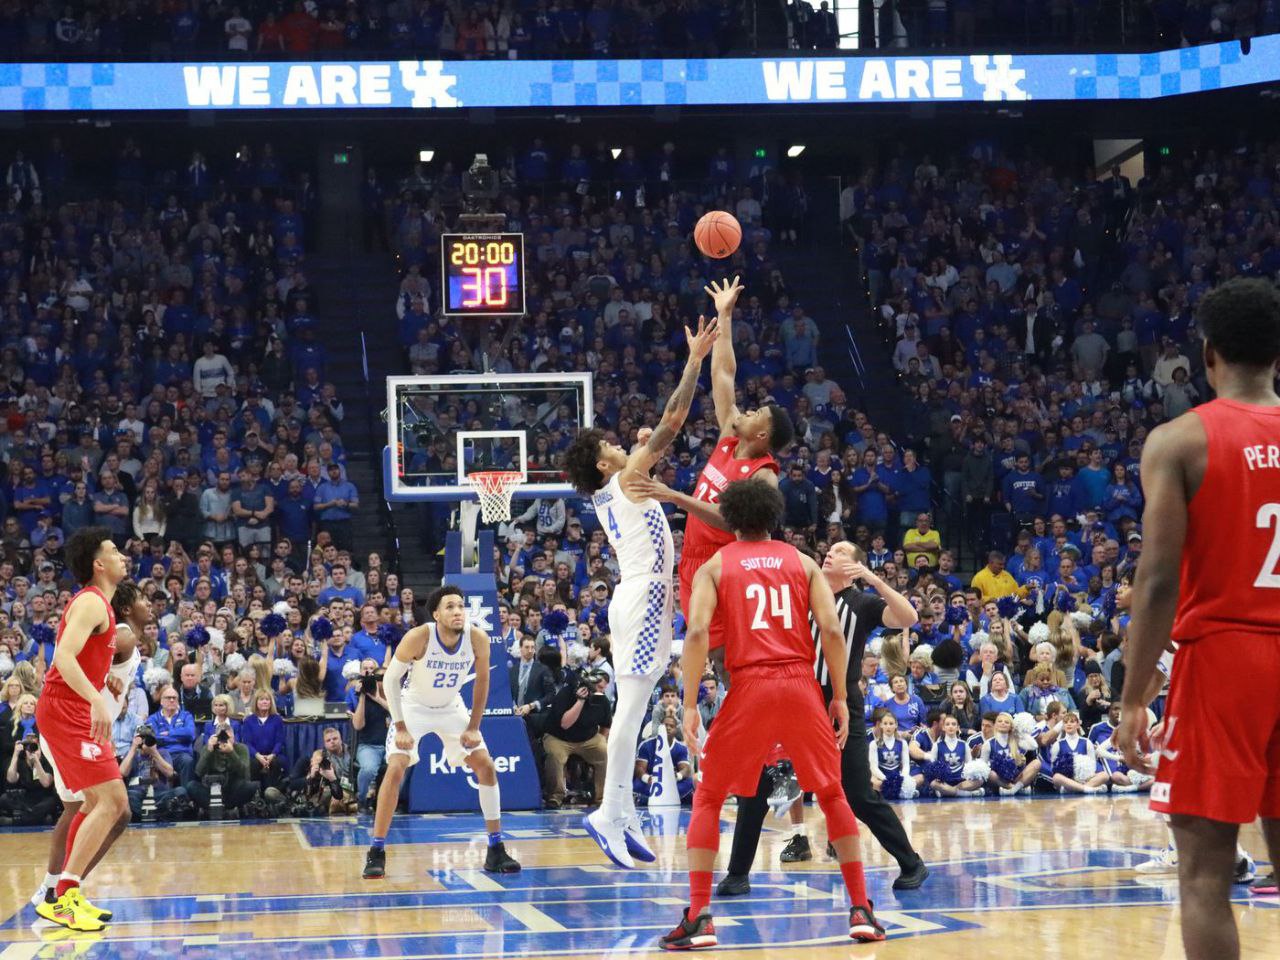 Detailing One Of College Basketball’s Most Passionate Rivalries: Kentucky vs. Louisville